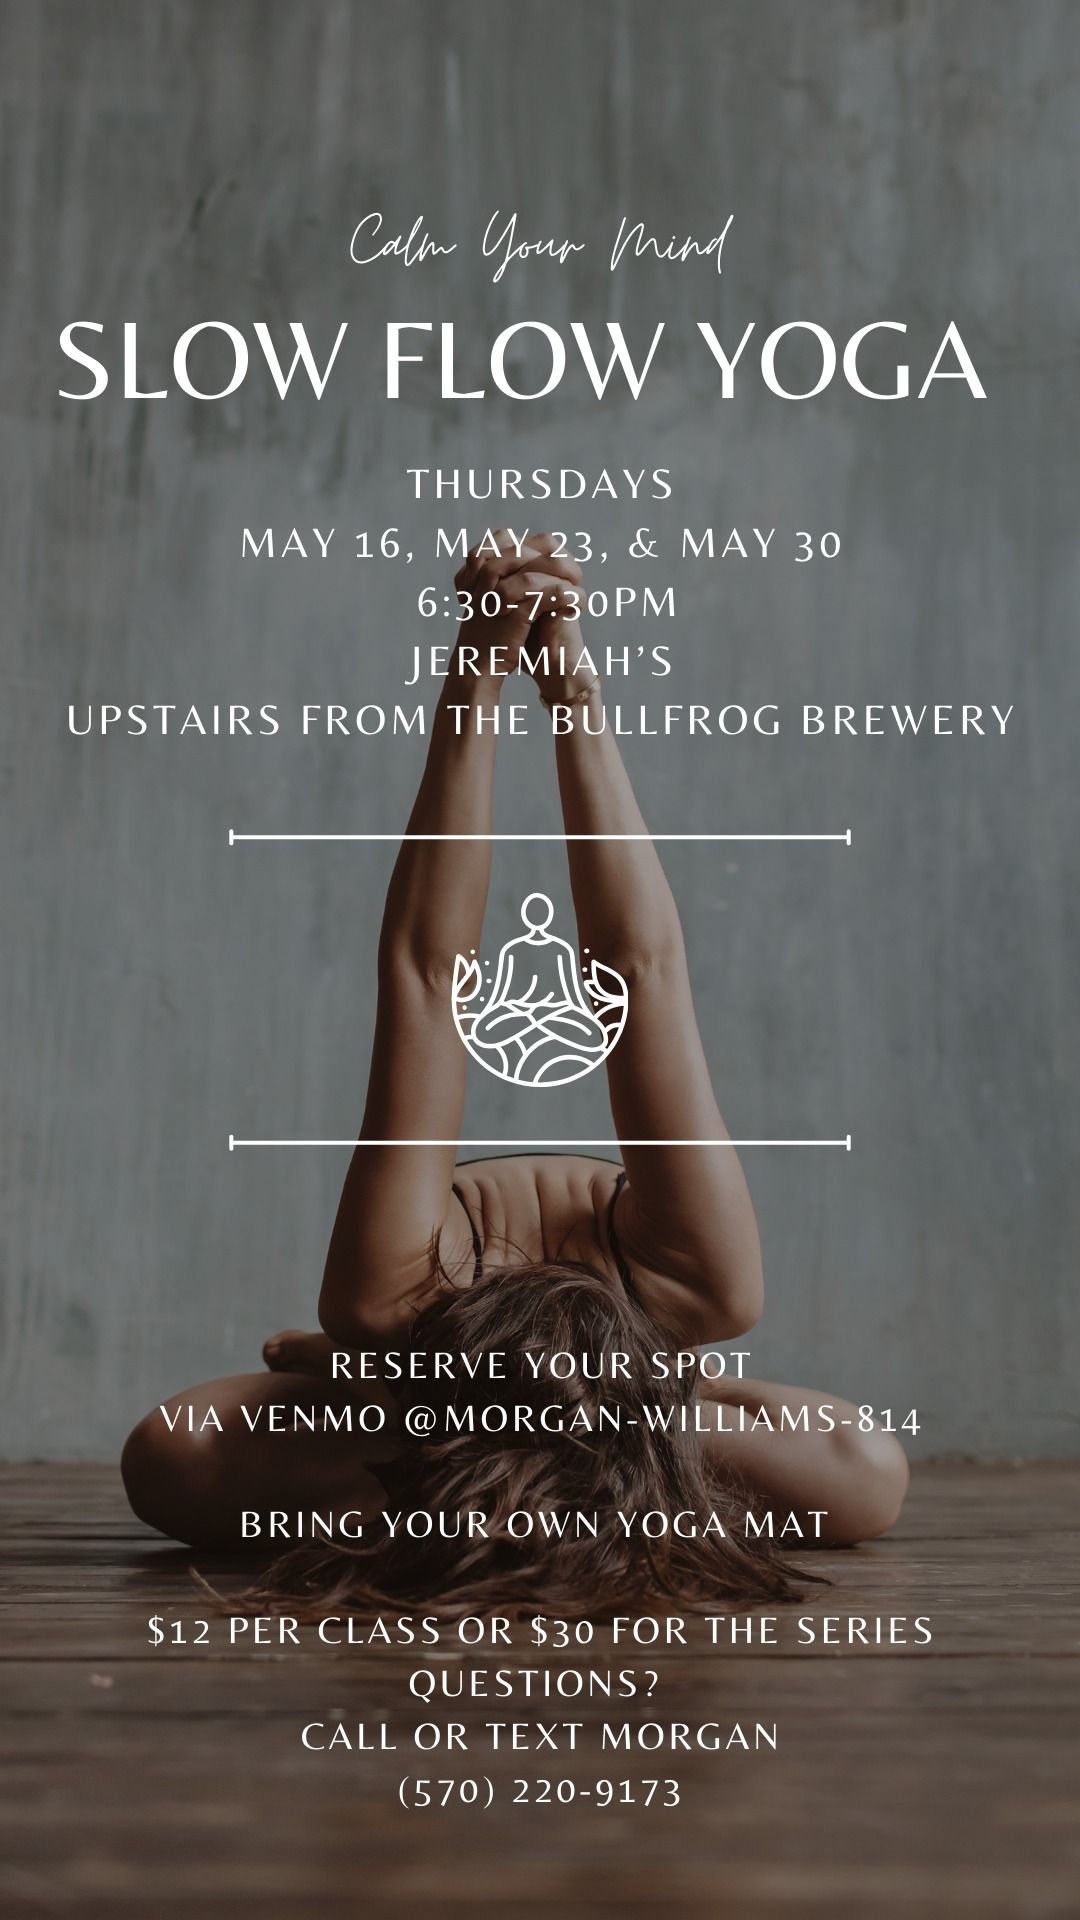 Slow Flow Yoga - Come to one or Come for all!